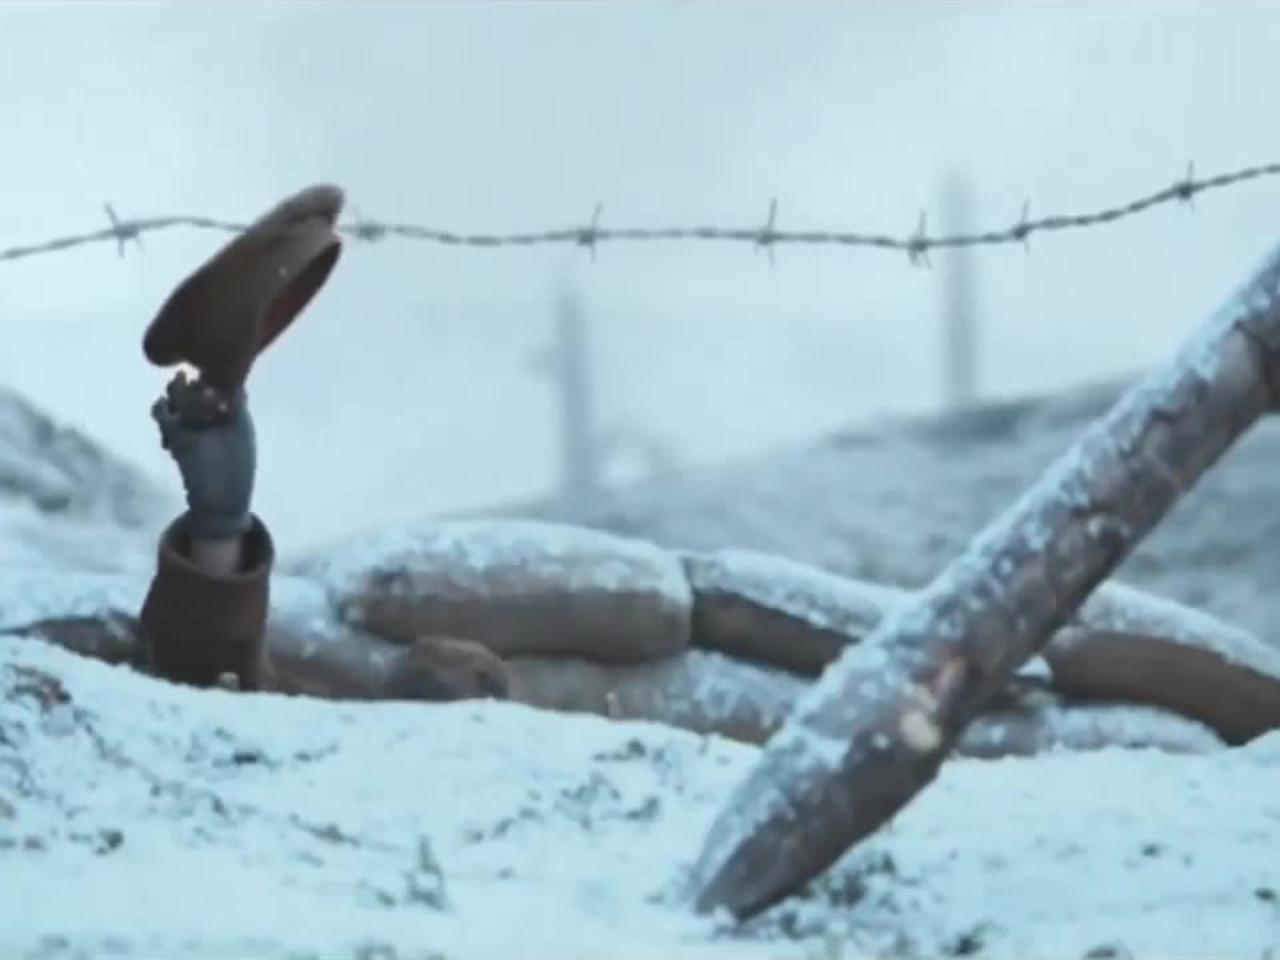 The Christmas Truce from World War 1 is one of my favourite Christmas stories.